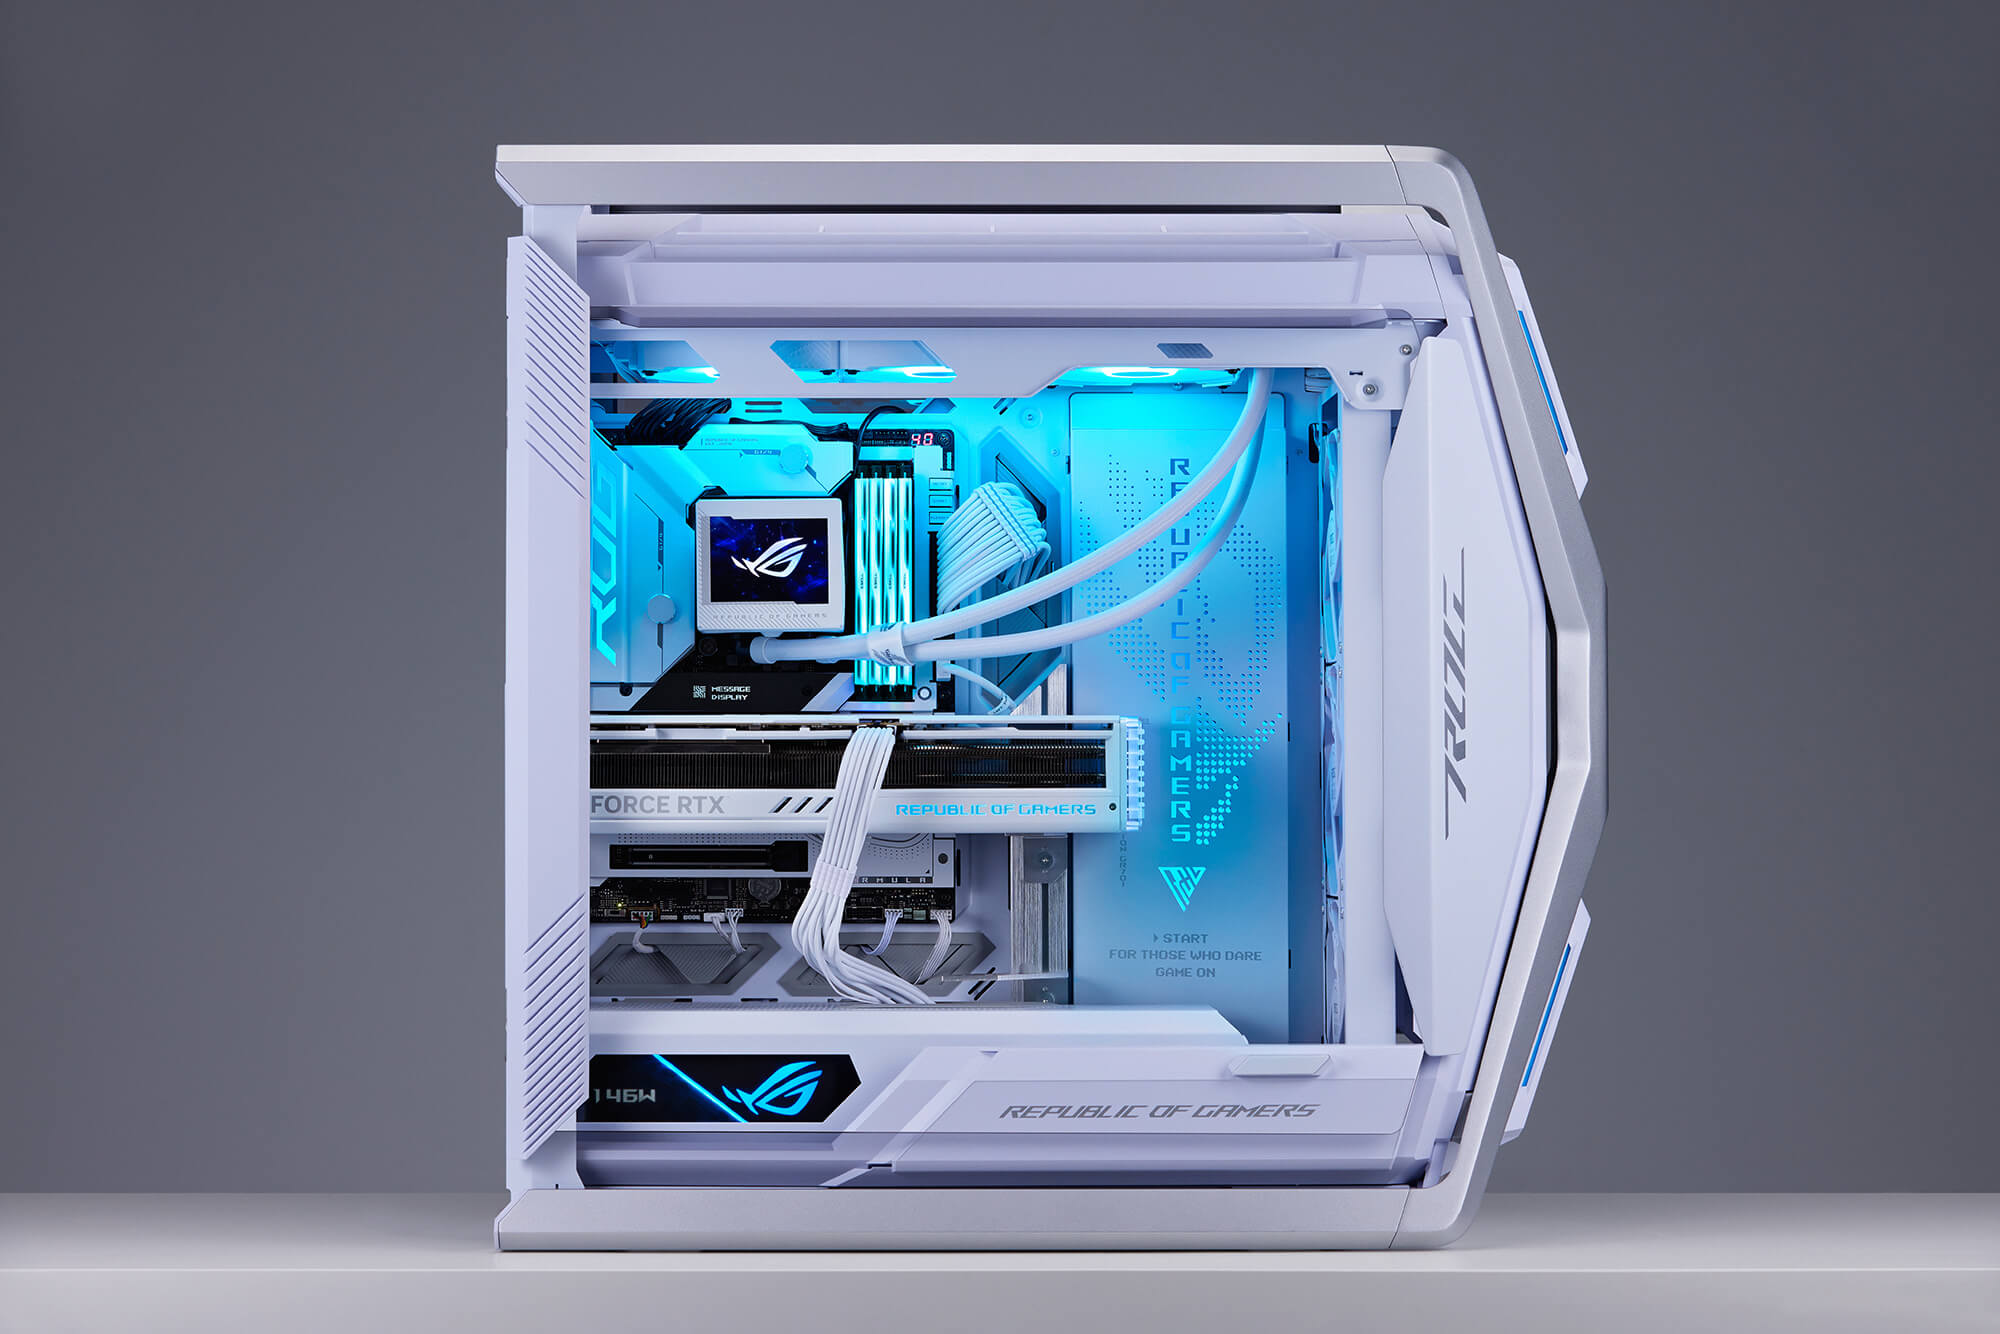 45-degree angle photo of the Frozen Throne PC build.